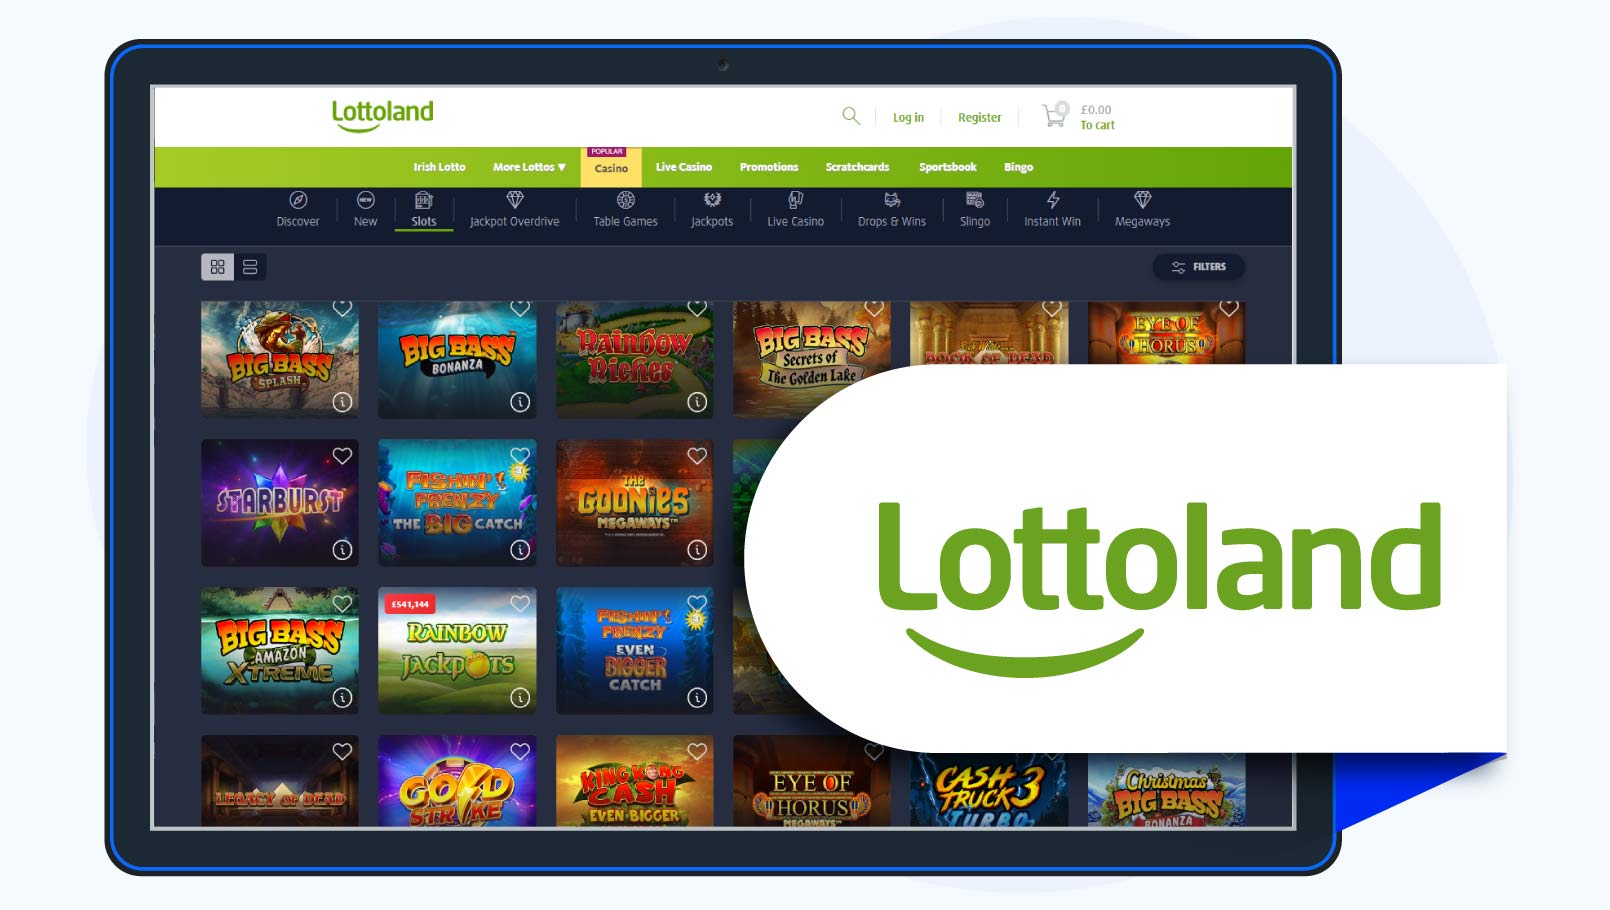 LottoLand Casino Best IGT Casino For Low Bet Slots